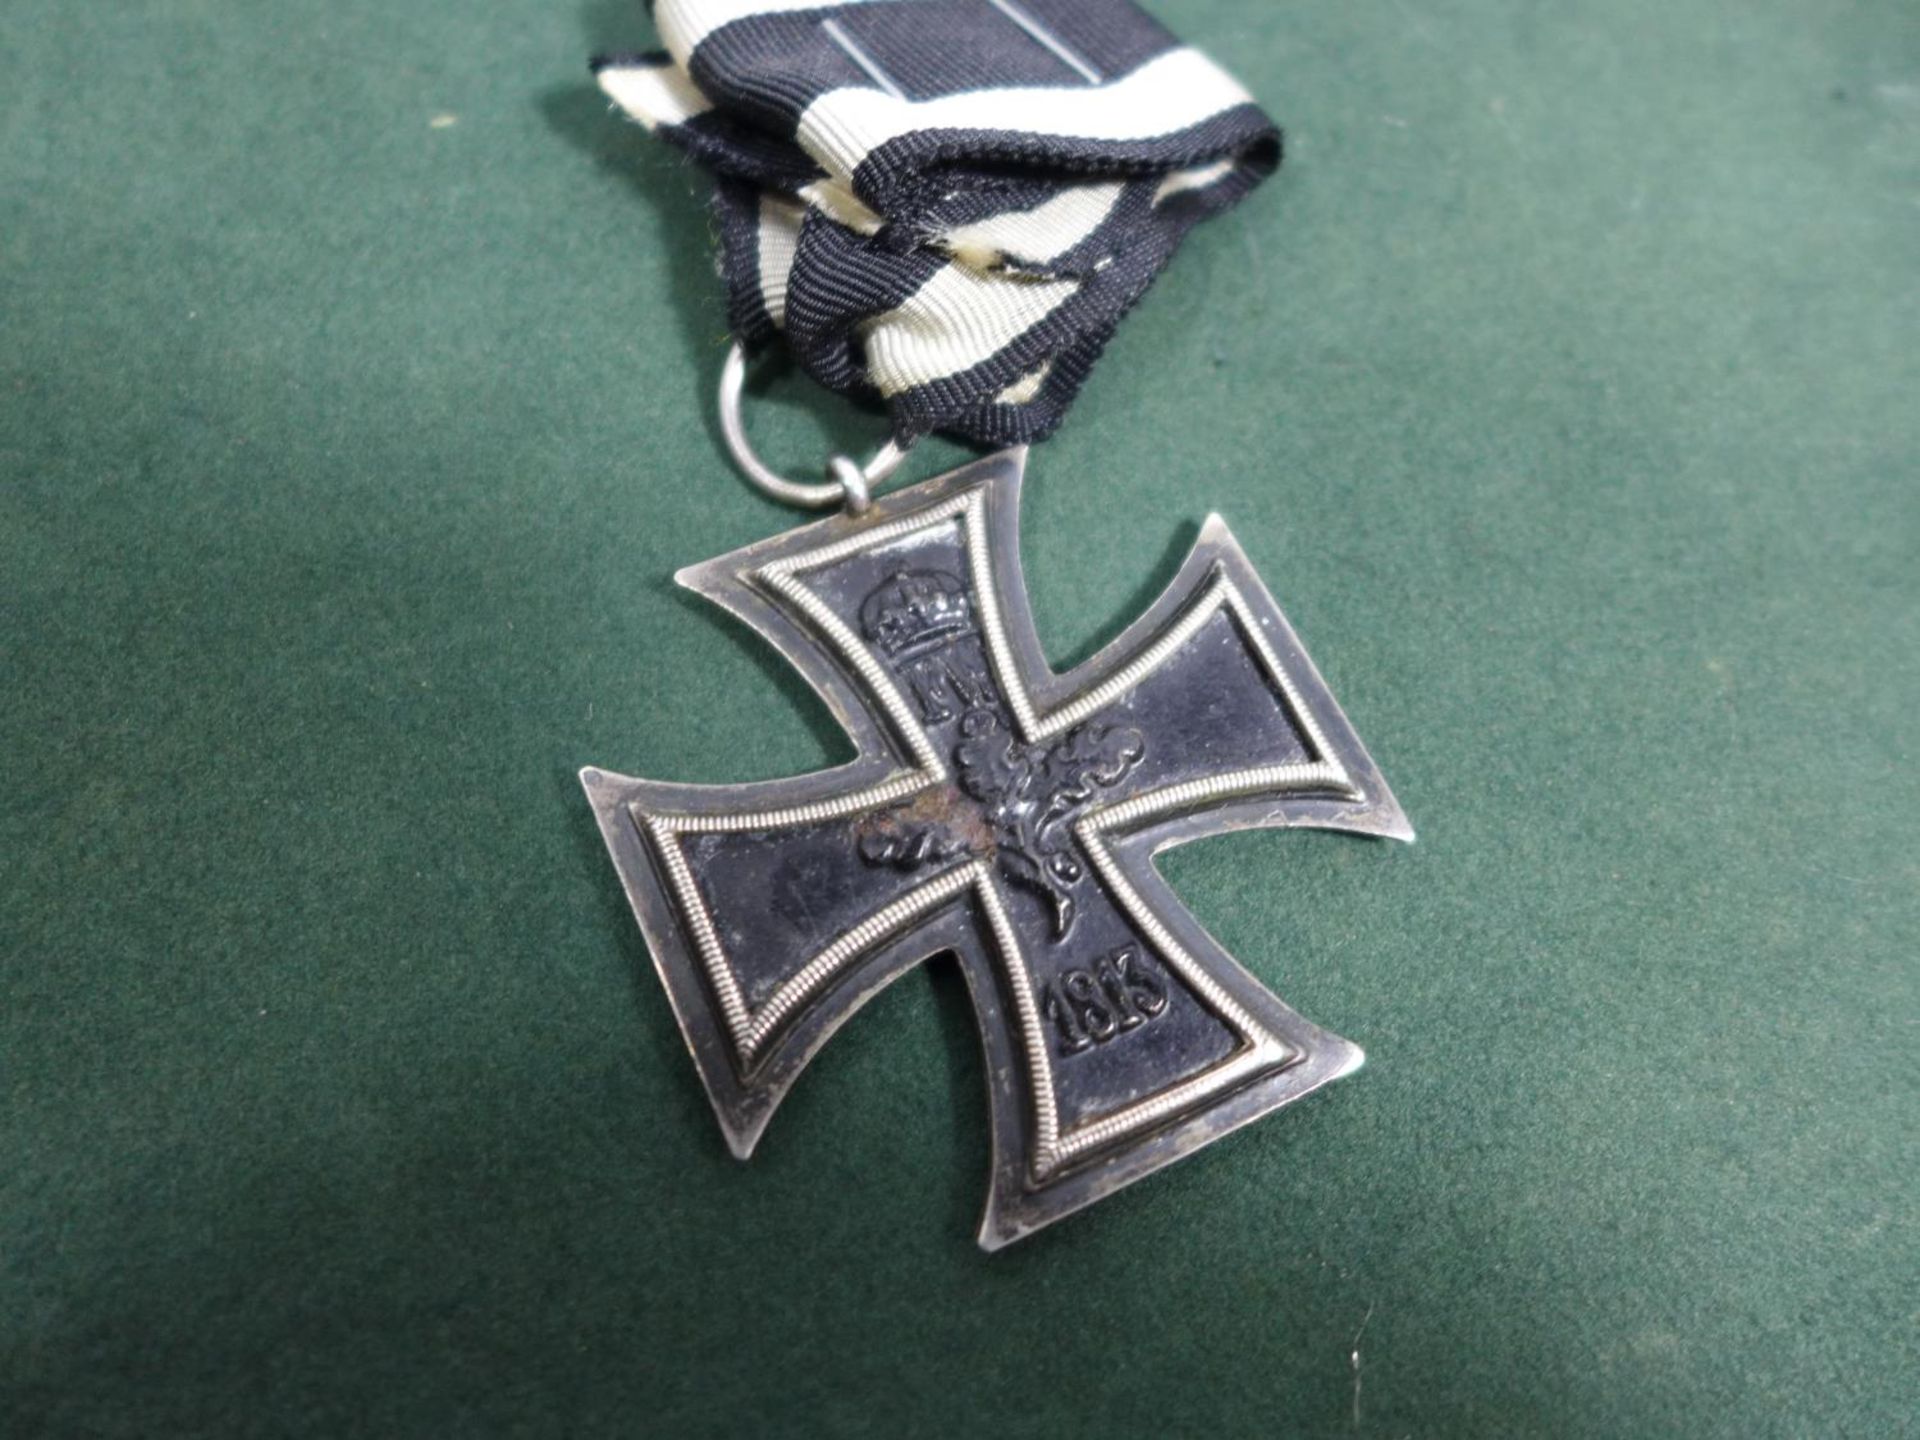 A WORLD WAR I IMPERIAL GERMAN IRON CROSS, SECOND CLASS - Image 2 of 2